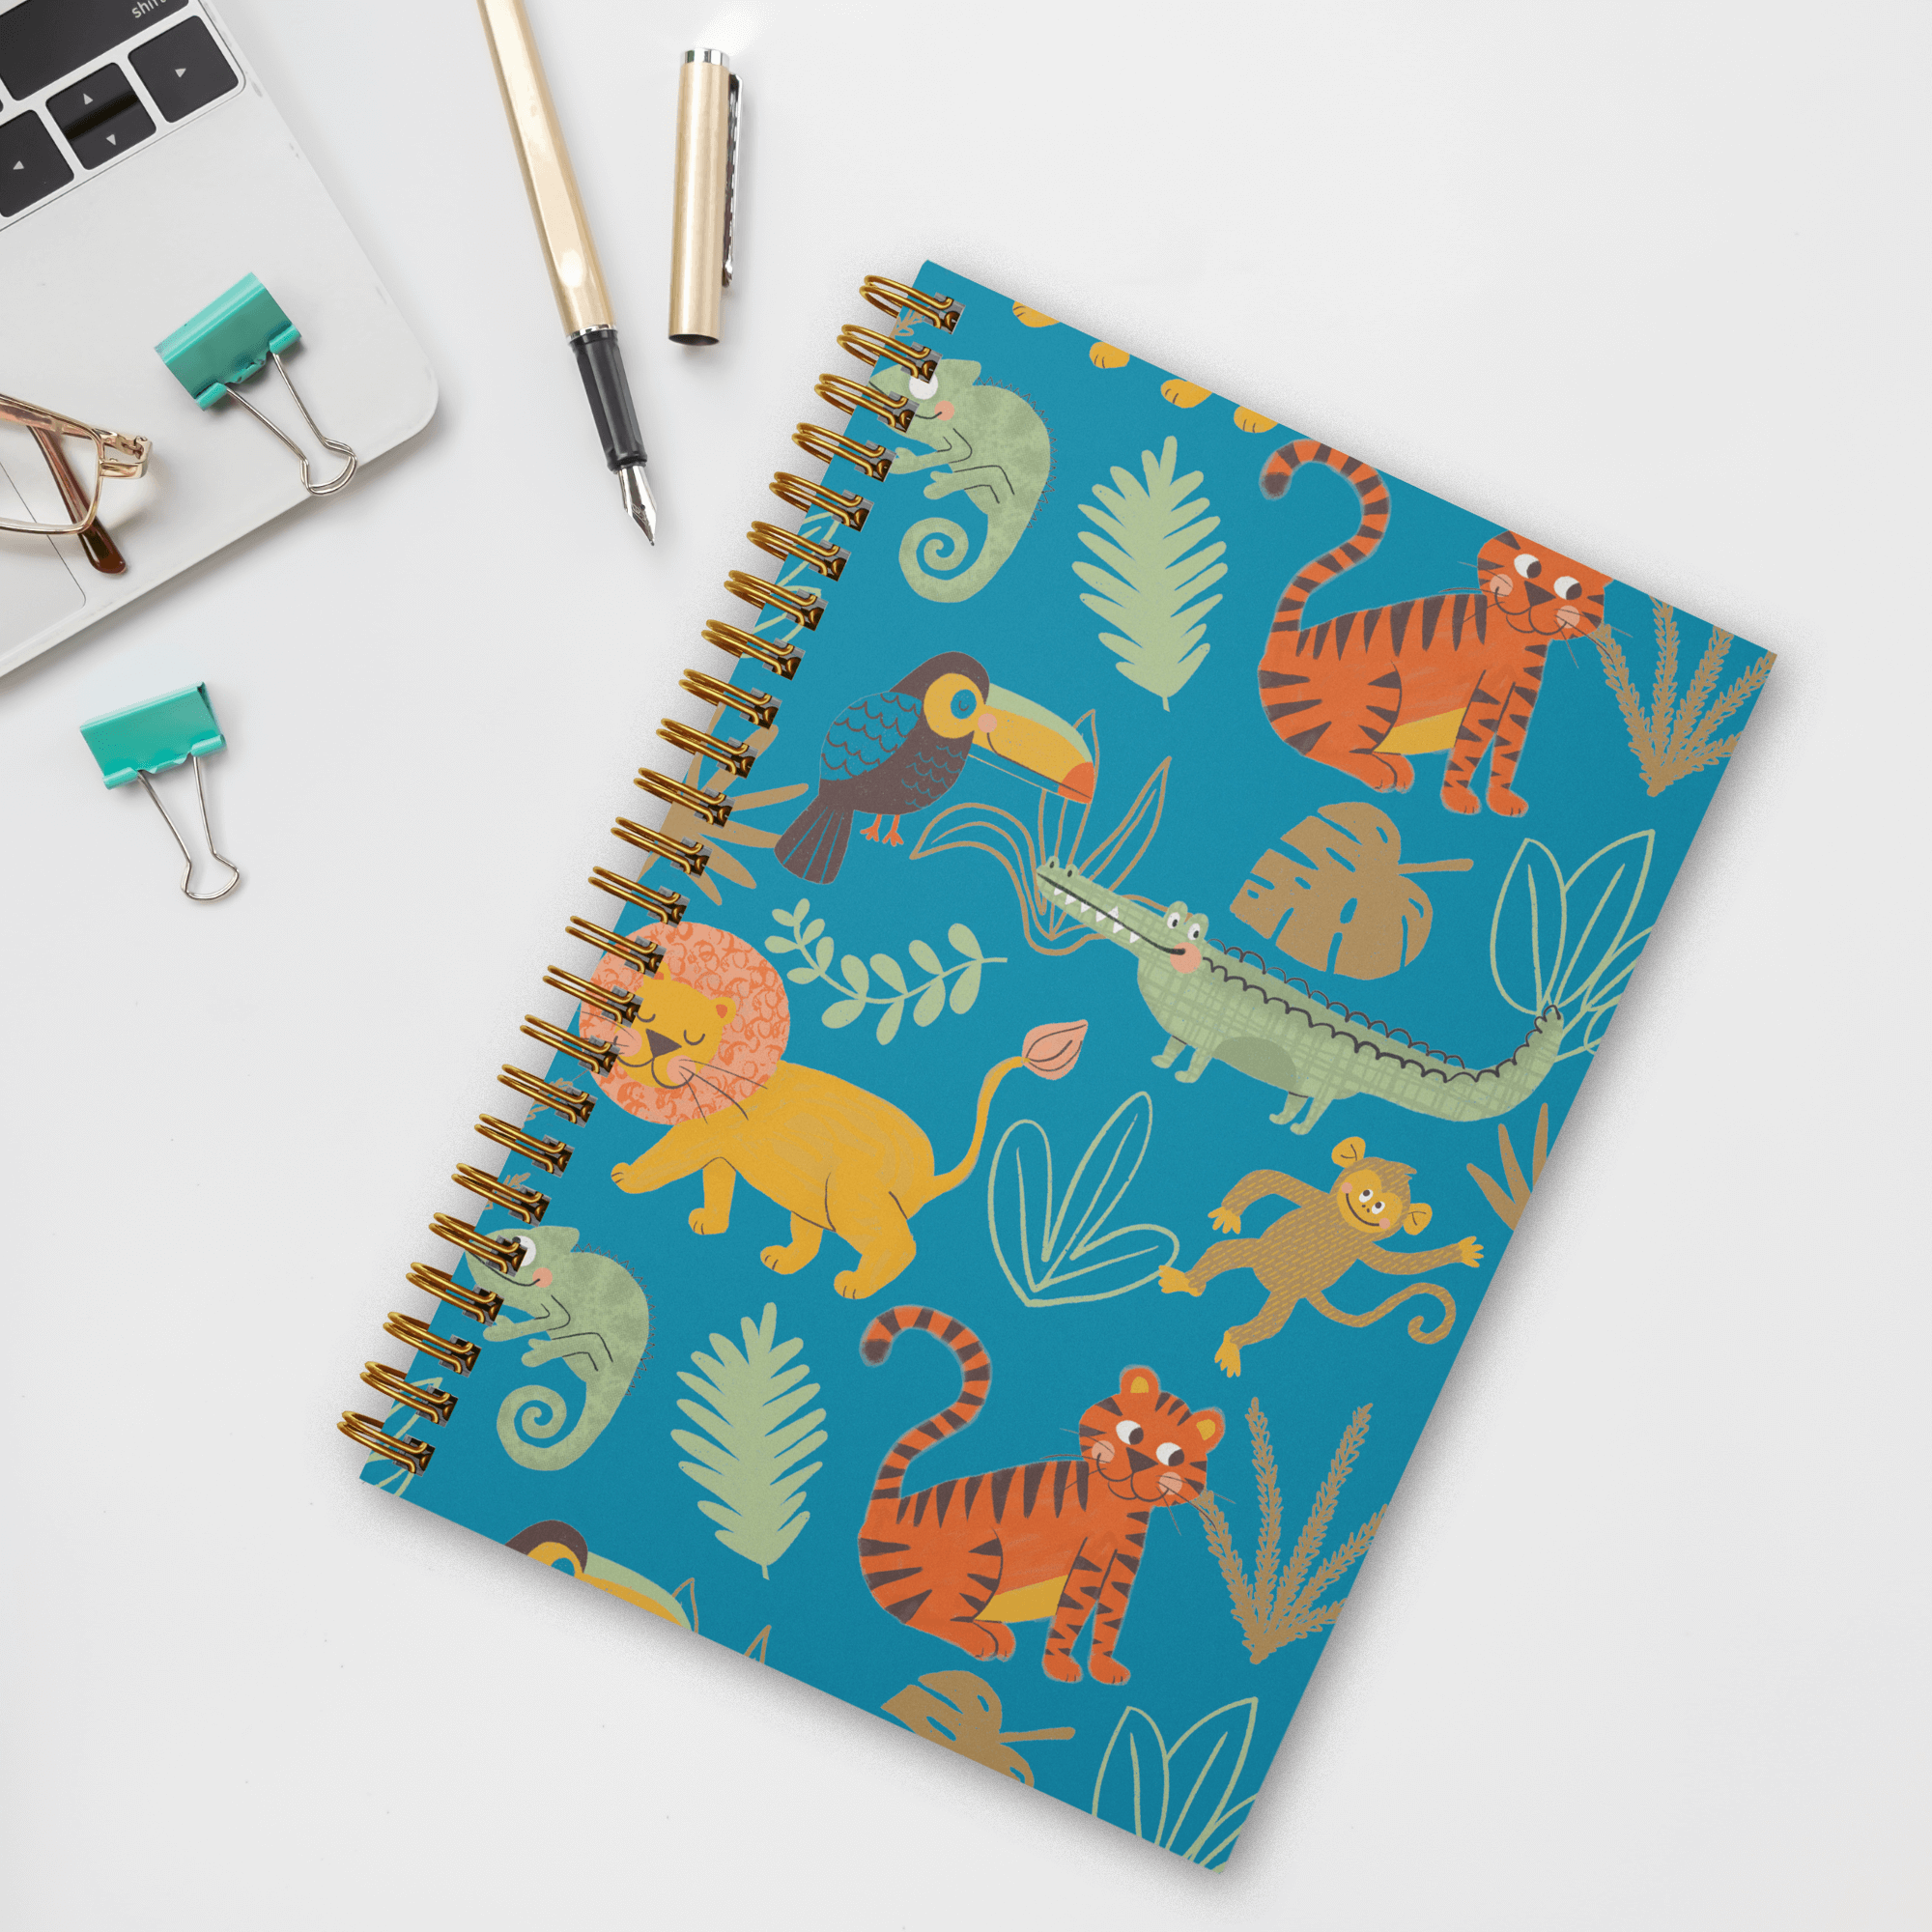 A photo of a wire spiral-bound notebook featuring hand-illustrated cute jungle animals such as lions, tigers, toucans, iguanas, monkeys, and crocodiles on a bright blue background with green and brown leaves in a tossed pattern on the recycled cover layin